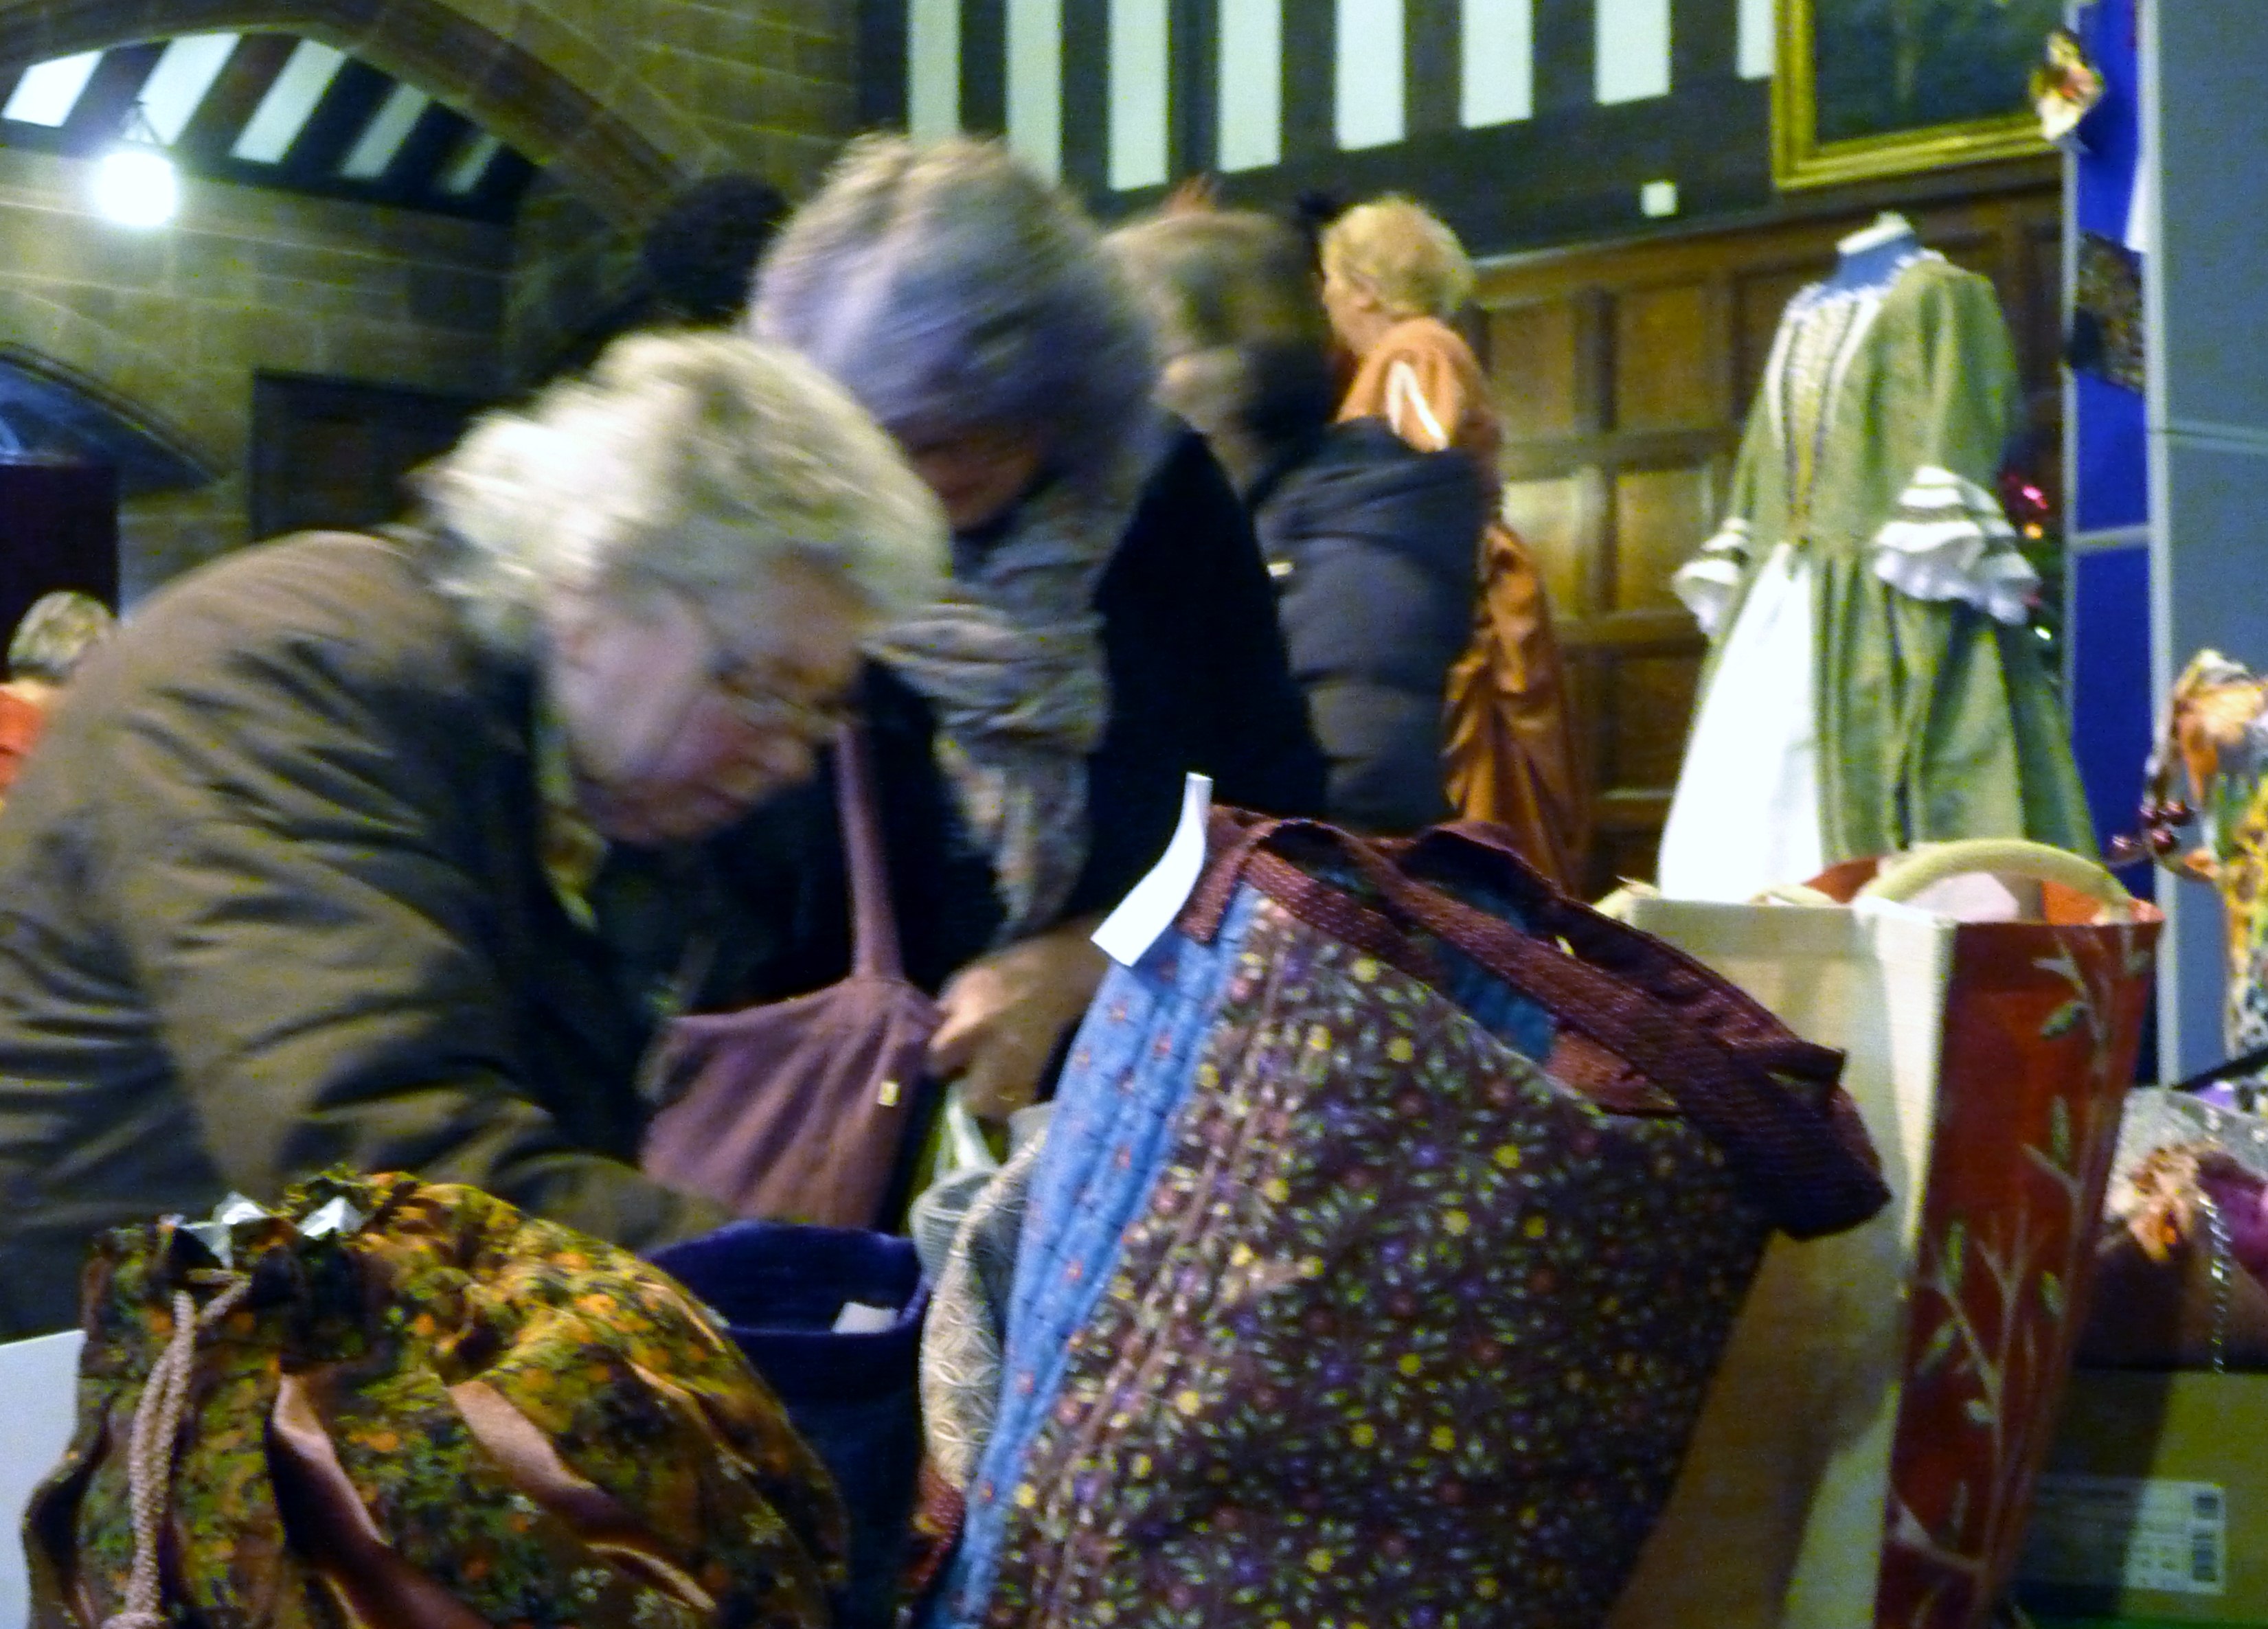 customers "bagging a bargain" at the Bag Stall, MEG Christmas Party 2014